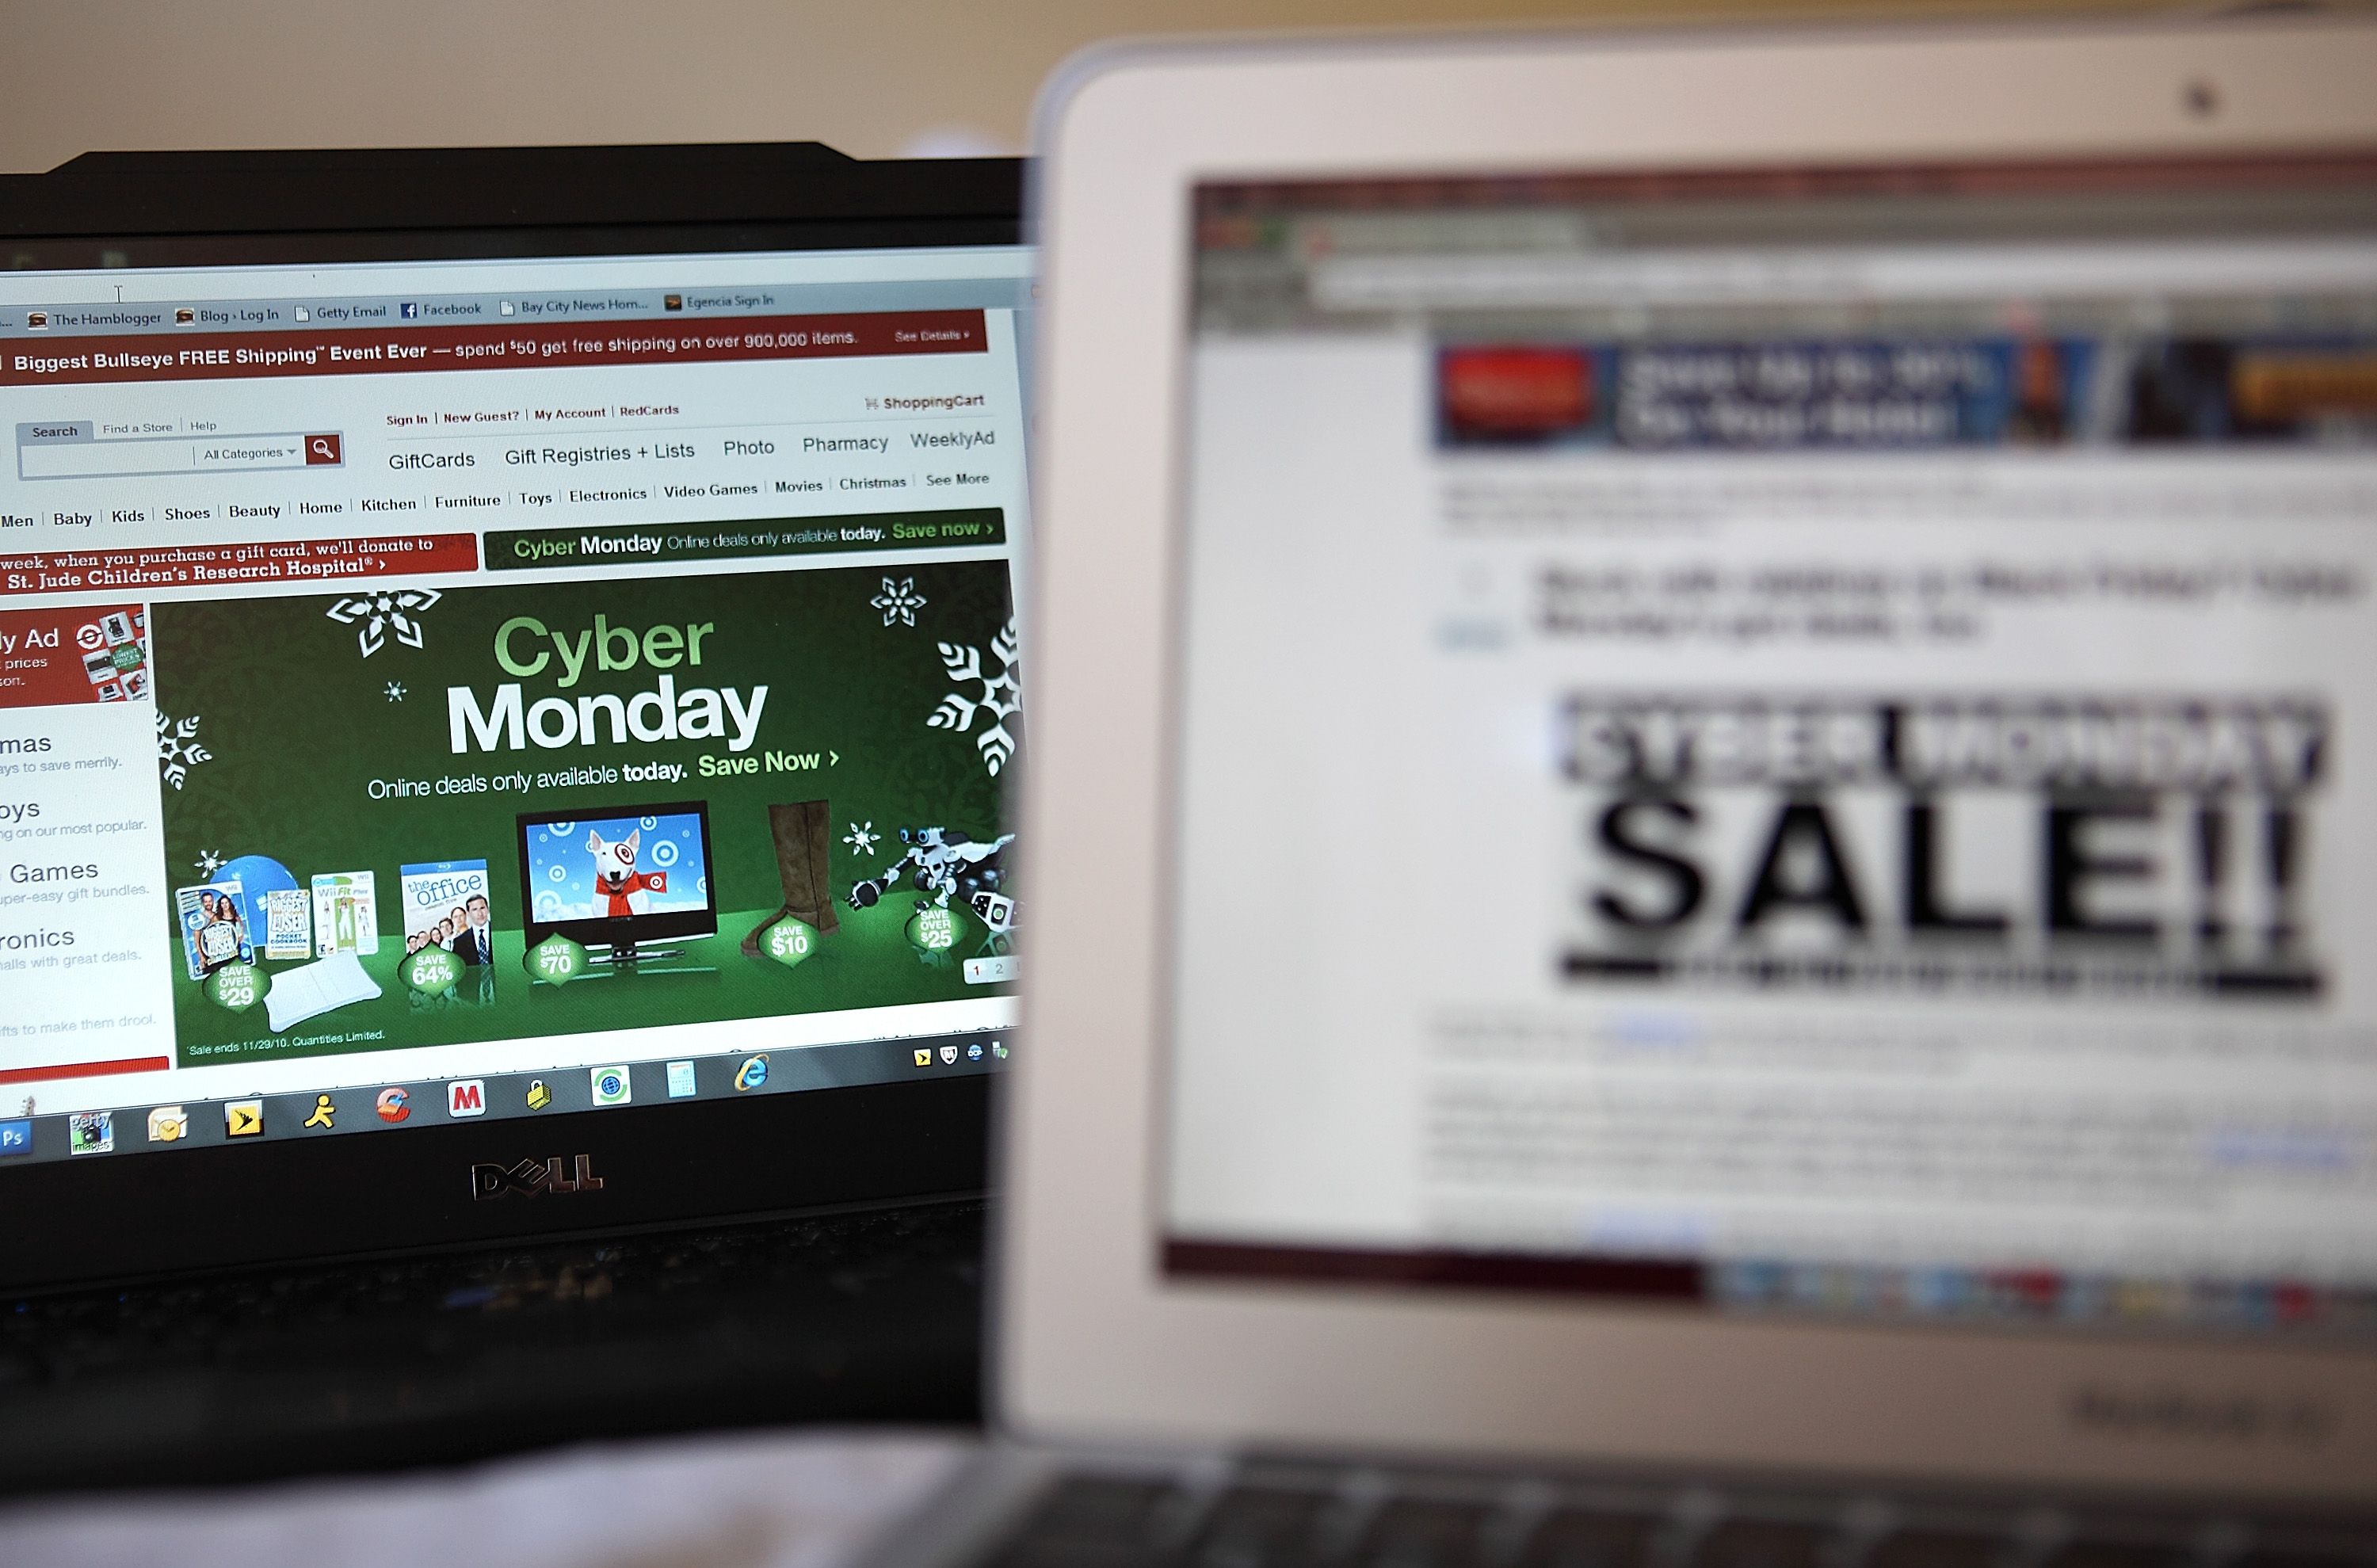 SAN ANSELMO, CA - NOVEMBER 29: In this photo illustration, an ad seen on the Target website for a Cyber Monday sale is displayed on laptop computers on November 29, 2010 in San Anselmo, California. Following Black Friday, online retailers are rolling out deep discounts in hopes of luring people who are returning to work into making online purchases on what is now referred to as Cyber Monday. (Photo Illustration by Justin Sullivan/Getty Images)